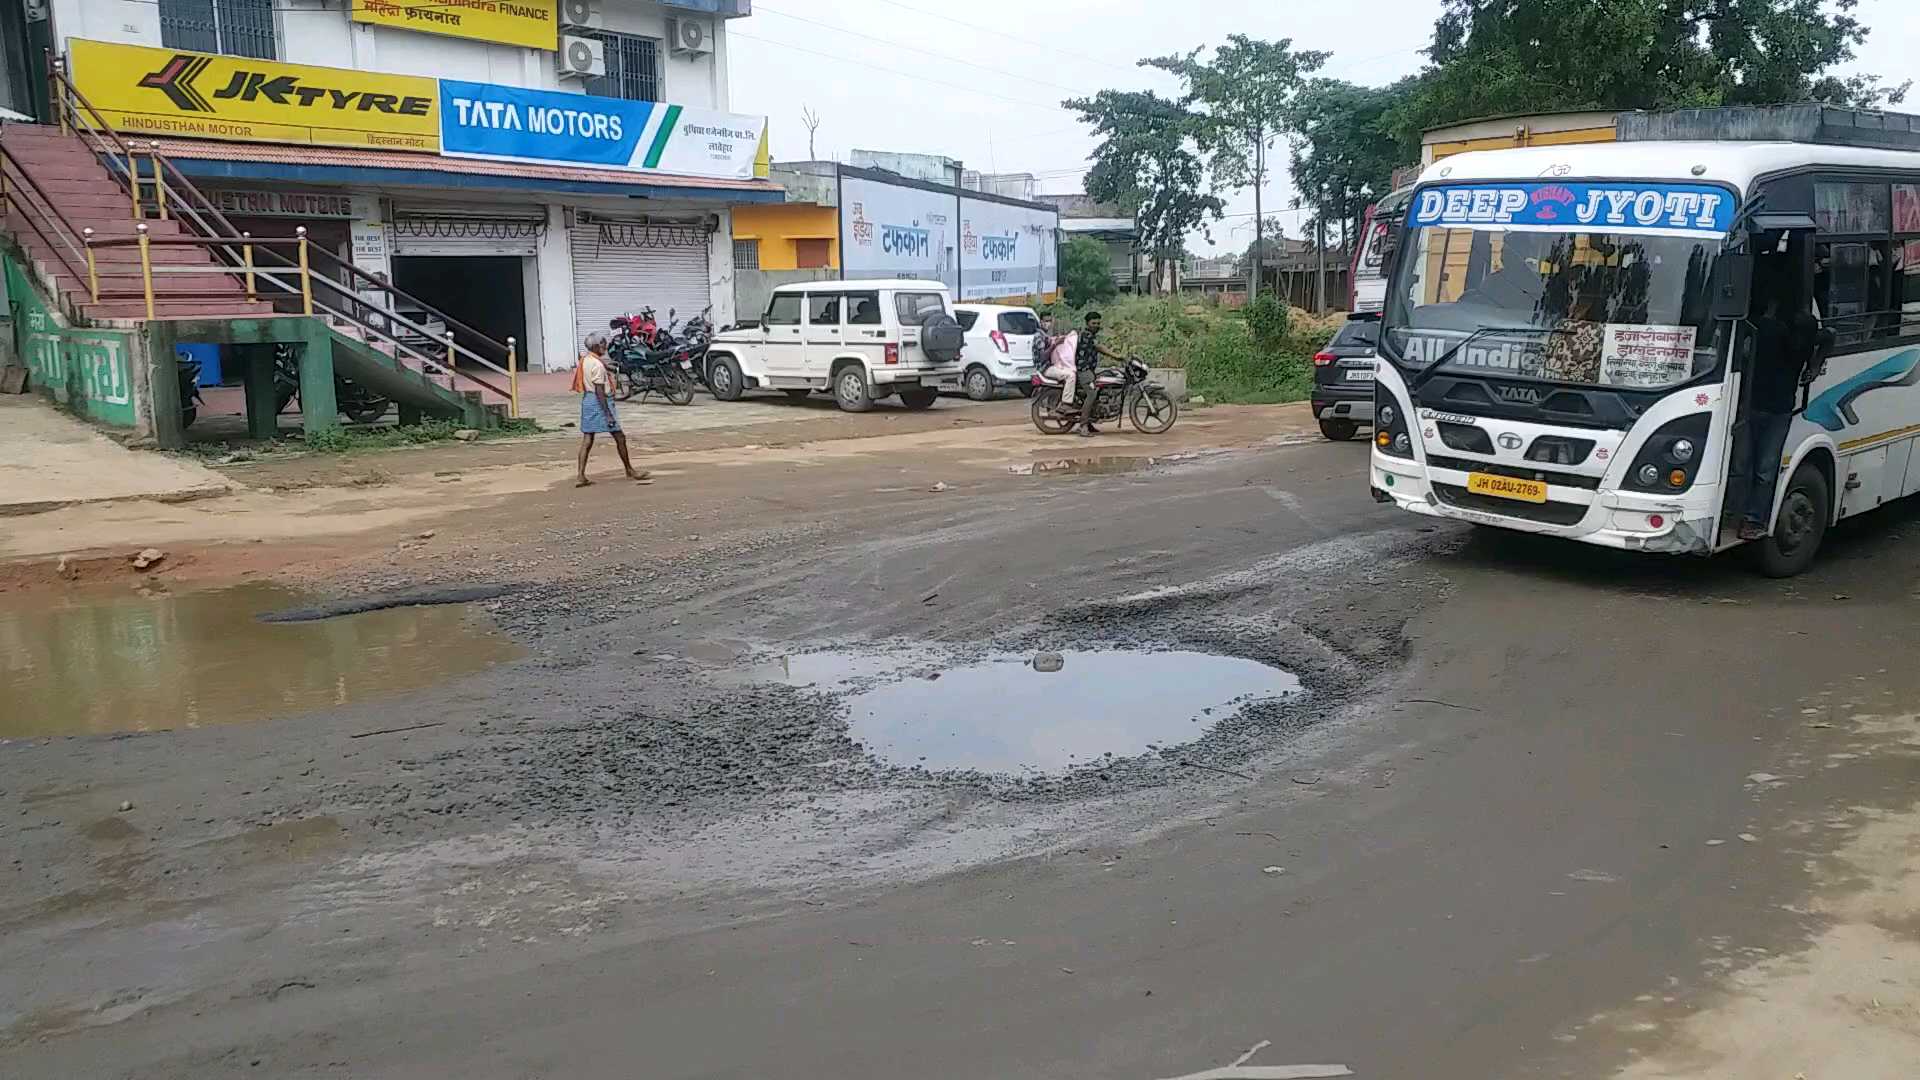 Potential for accident due to pothole